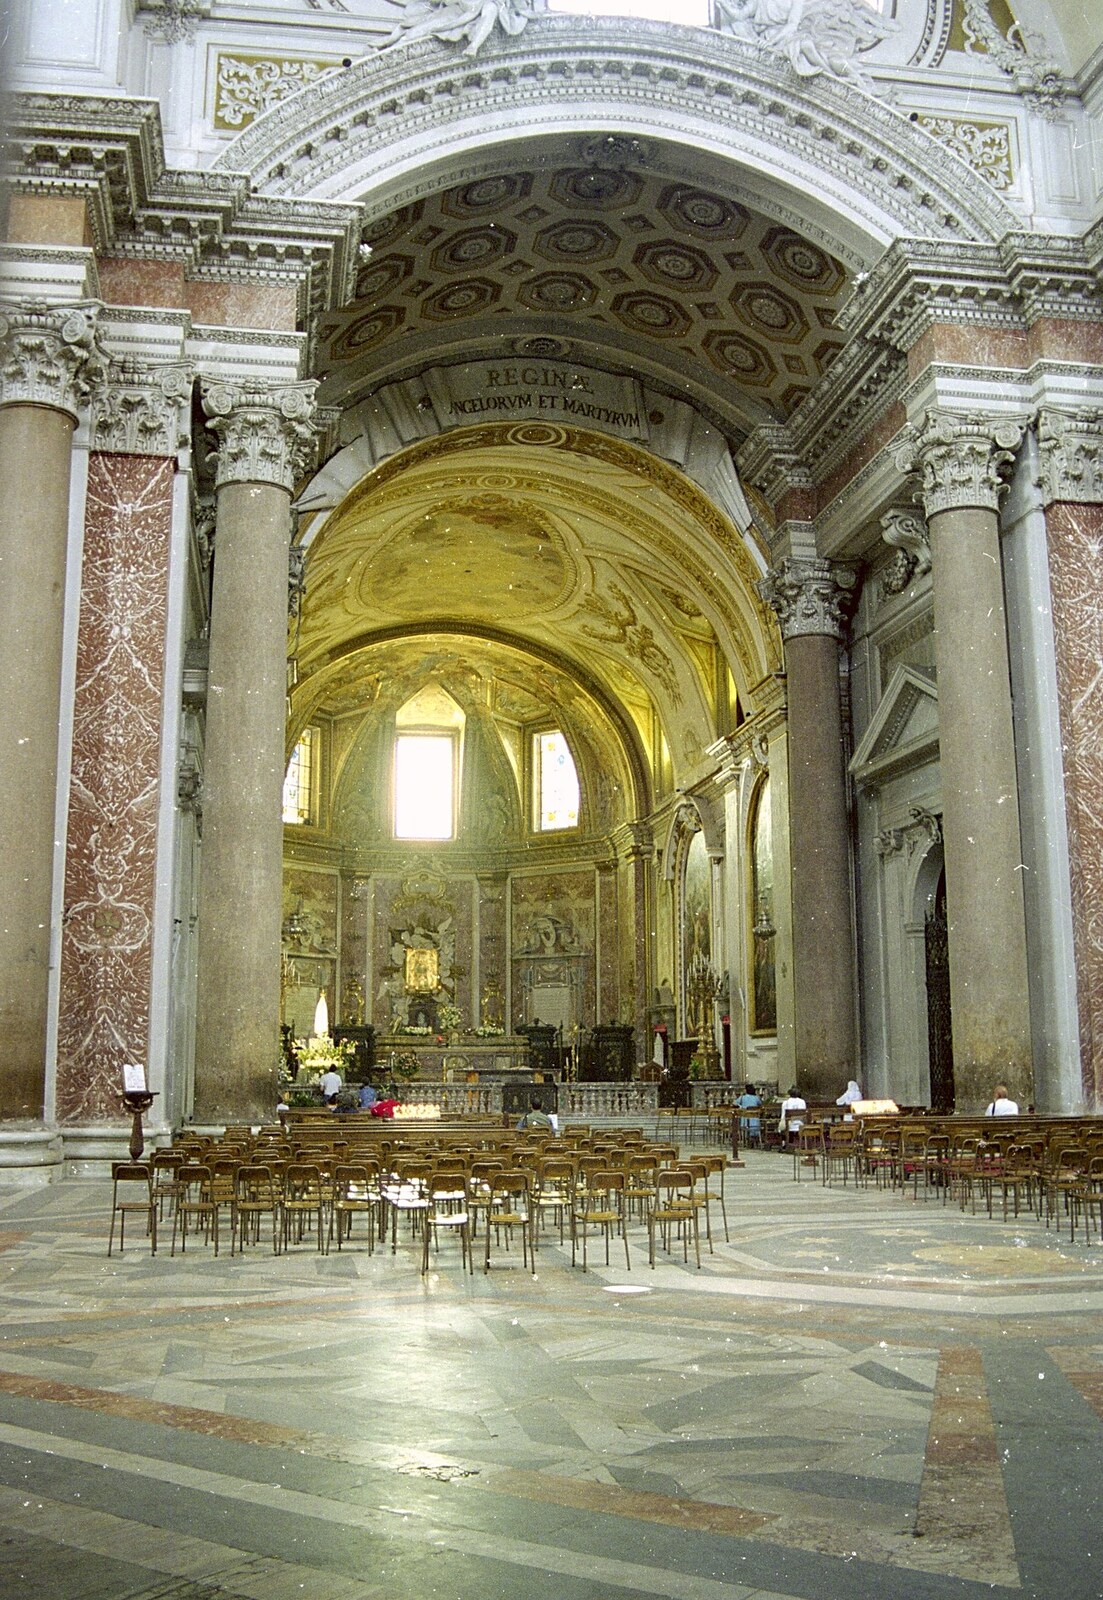 A crowd of chairs in St. Peter's from A Working Trip to Rome, Italy - 10th September 1999